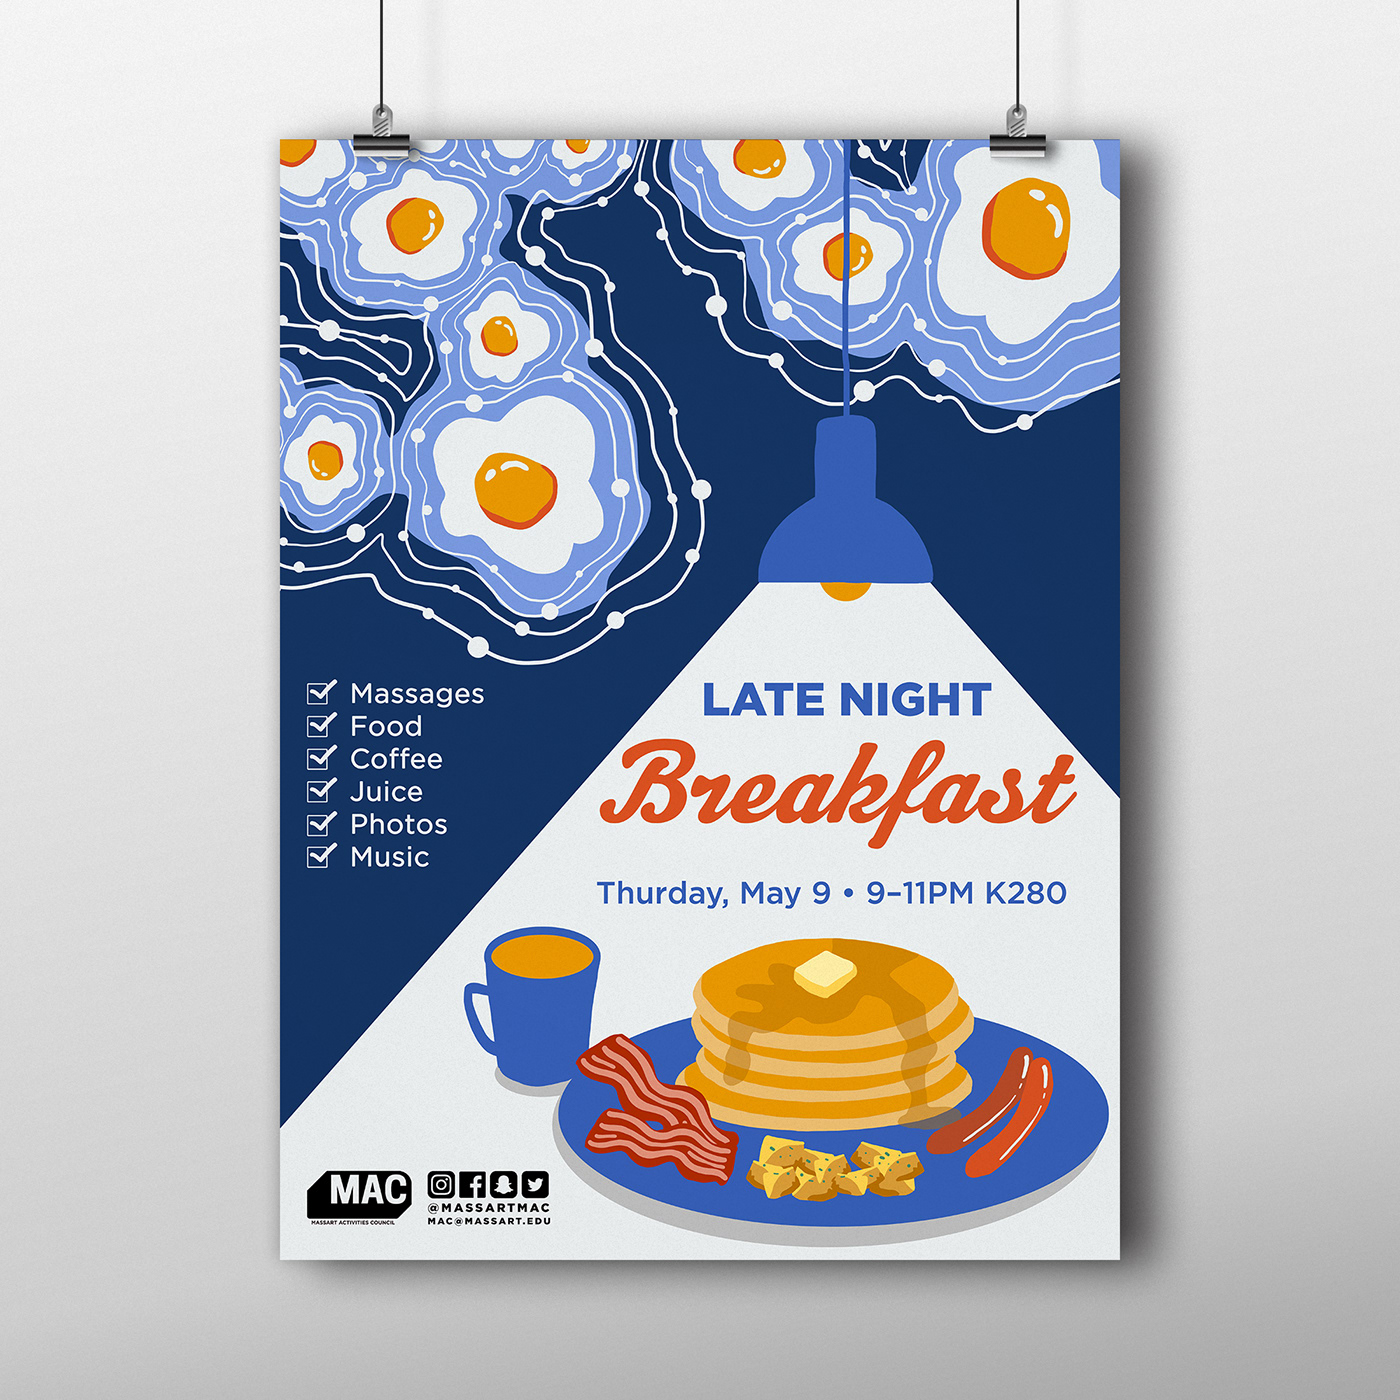 breakfast late night graphic design  ILLUSTRATION  poster Advertising  campus event egg pancake bacon